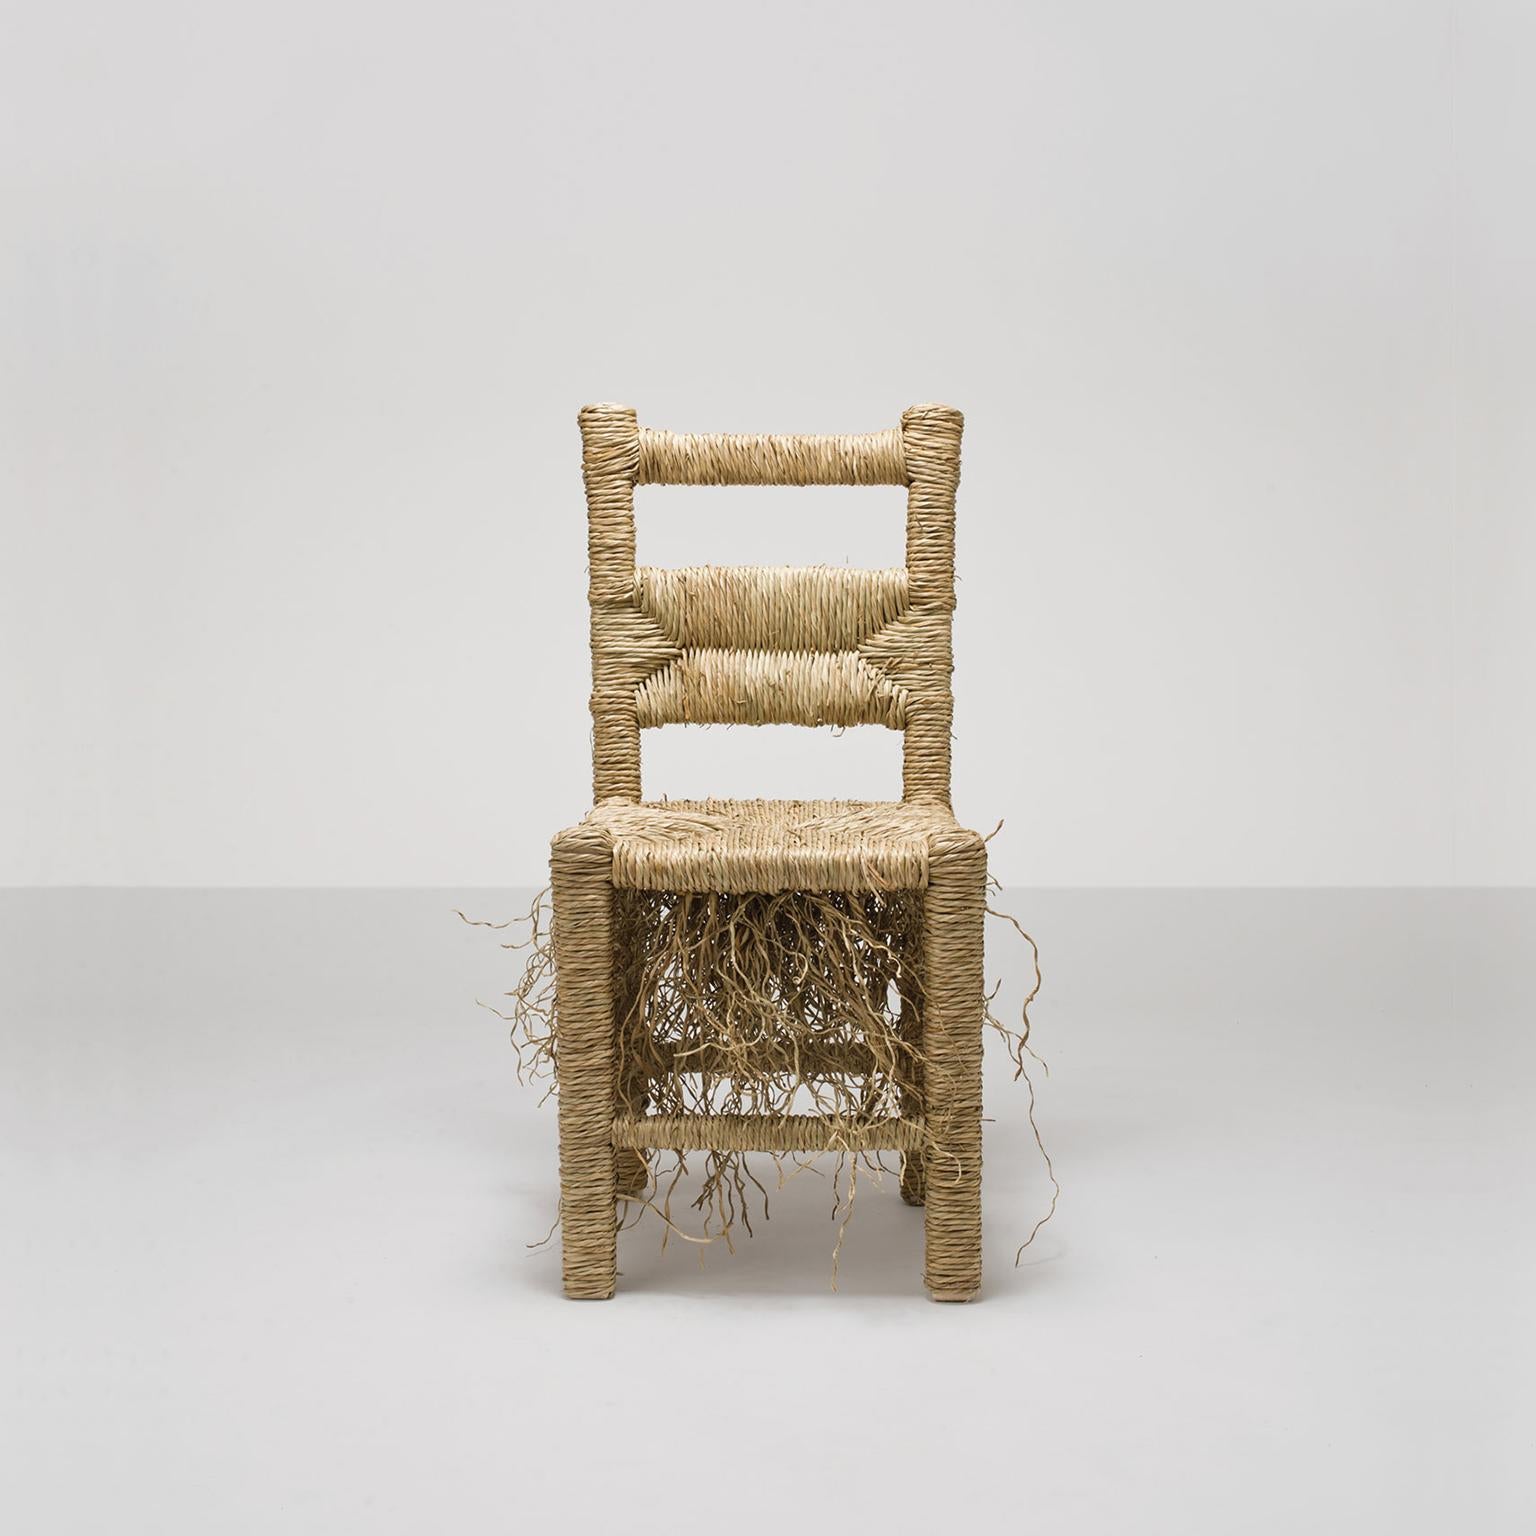 Hand-Crafted 21st Century Vincent Set of 4 Chairs by Atelier Biagetti Caned Natural Wood